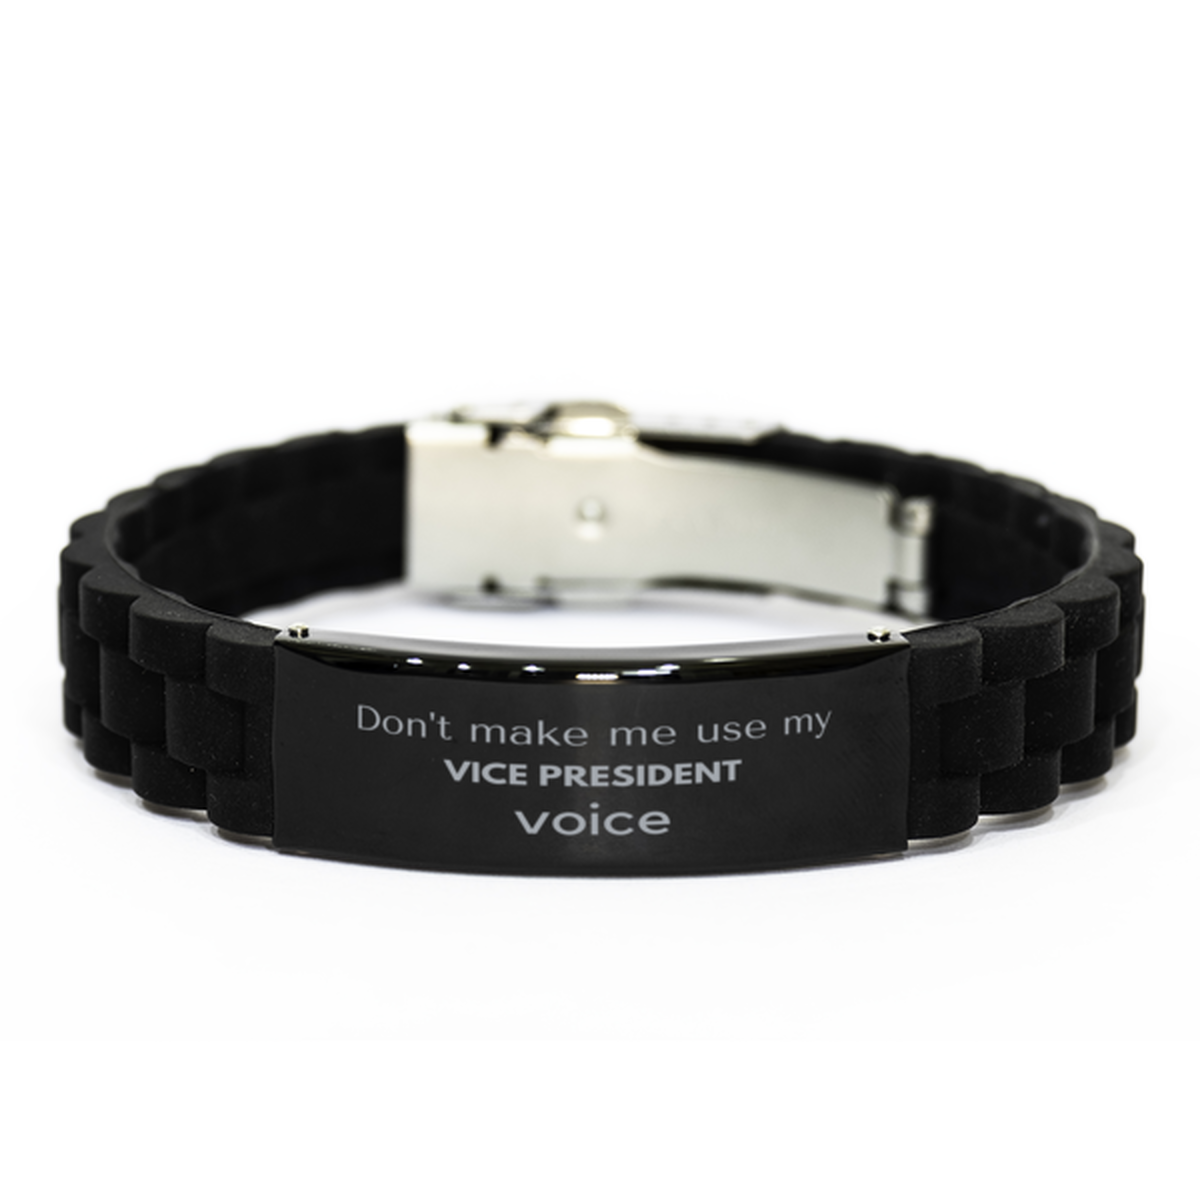 Don't make me use my Vice President voice, Sarcasm Vice President Gifts, Christmas Vice President Black Glidelock Clasp Bracelet Birthday Unique Gifts For Vice President Coworkers, Men, Women, Colleague, Friends